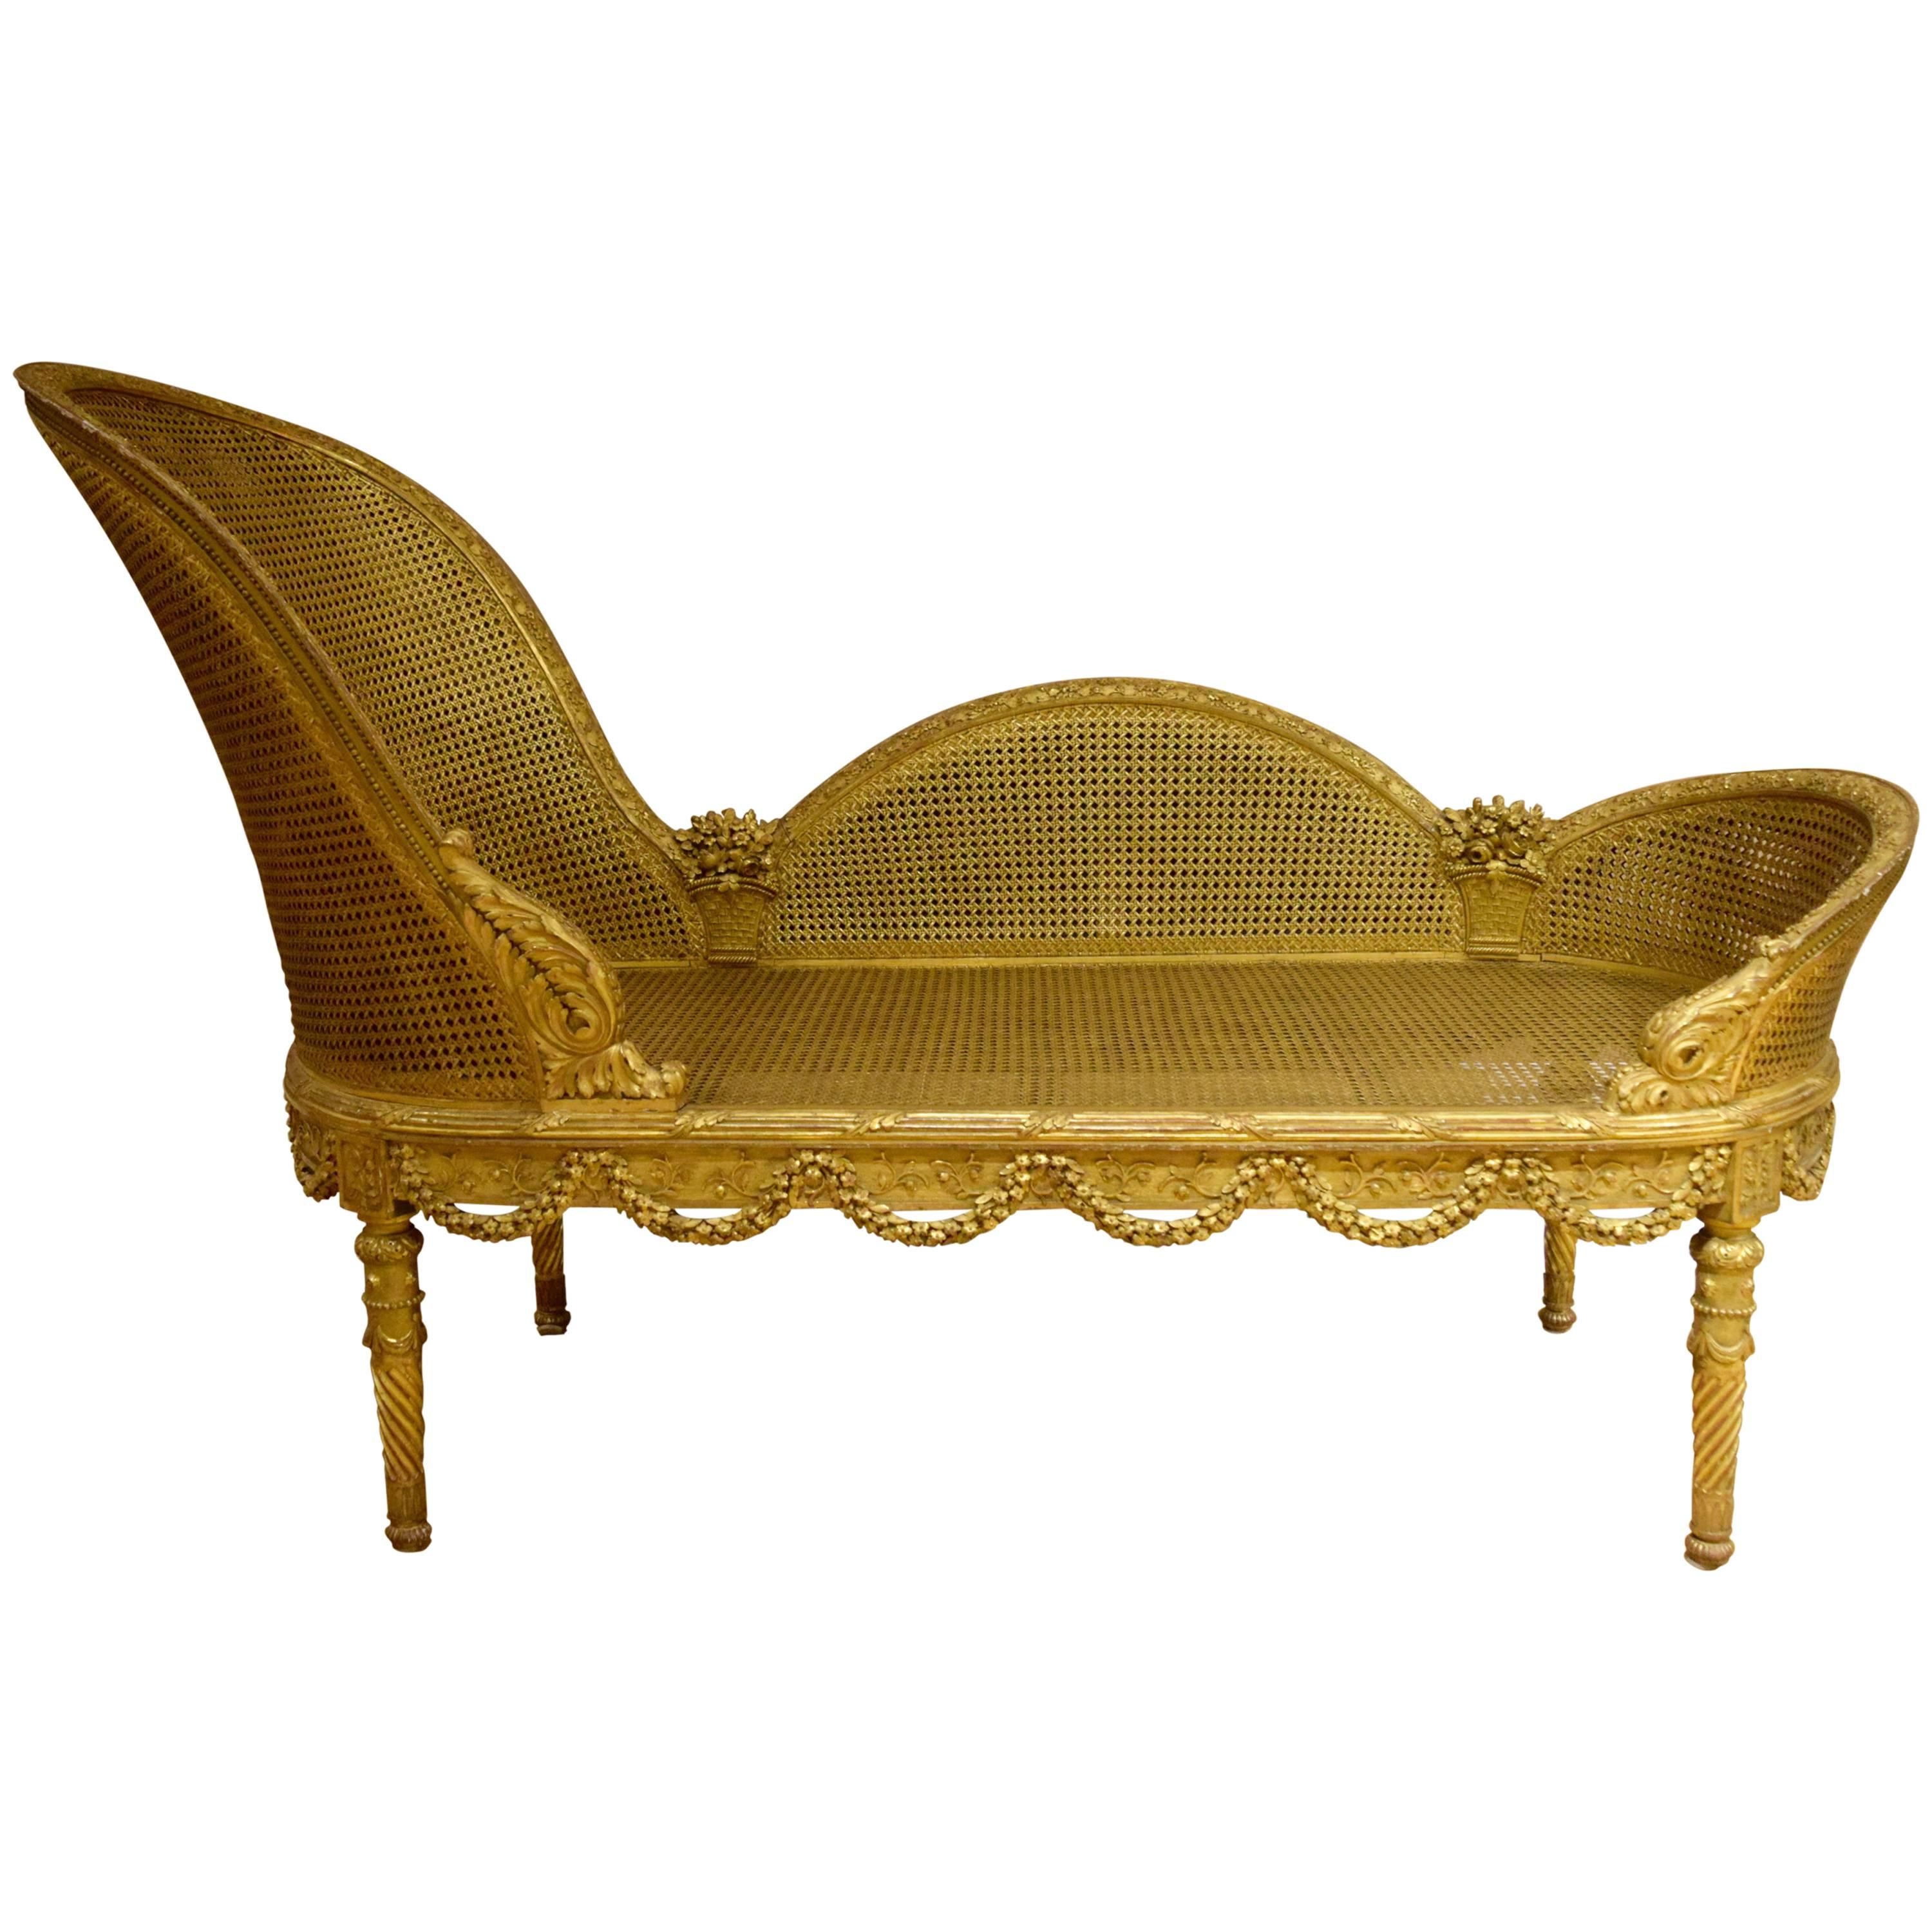 This chaise lounge is entirely gilded, and superbly carved with openwork swags and baskets brimming with flowers. The originality of the Louis XVI-inspired form speaks to the creativity of the finest Belle Epoque designers working in Paris around